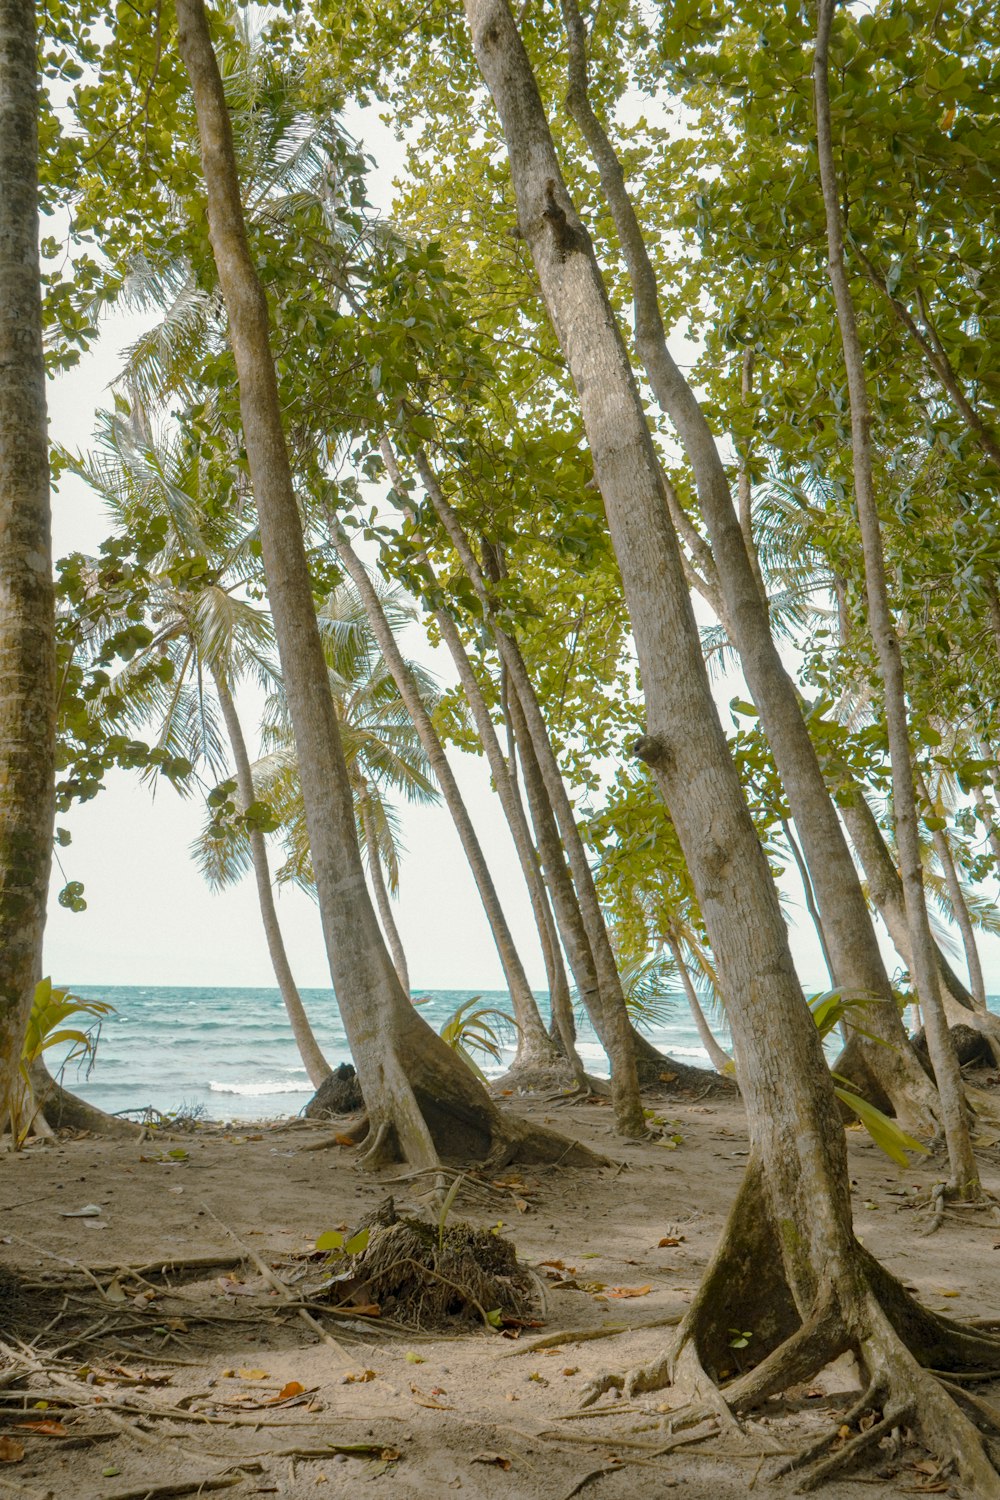 a group of trees on a beach with the ocean in the background